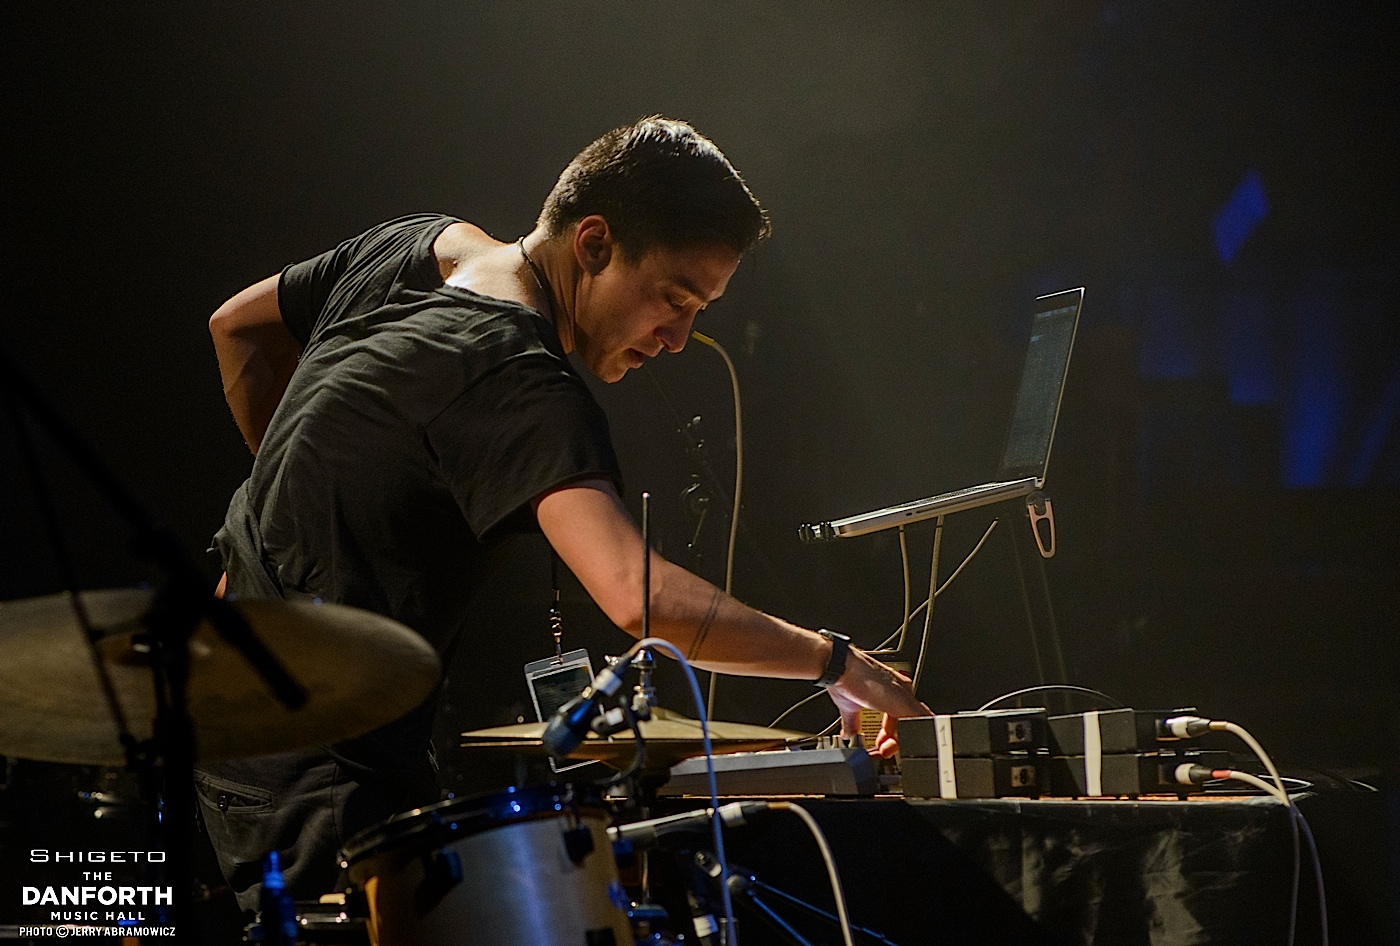 SHIGETO performs at The Danforth Music Hall.